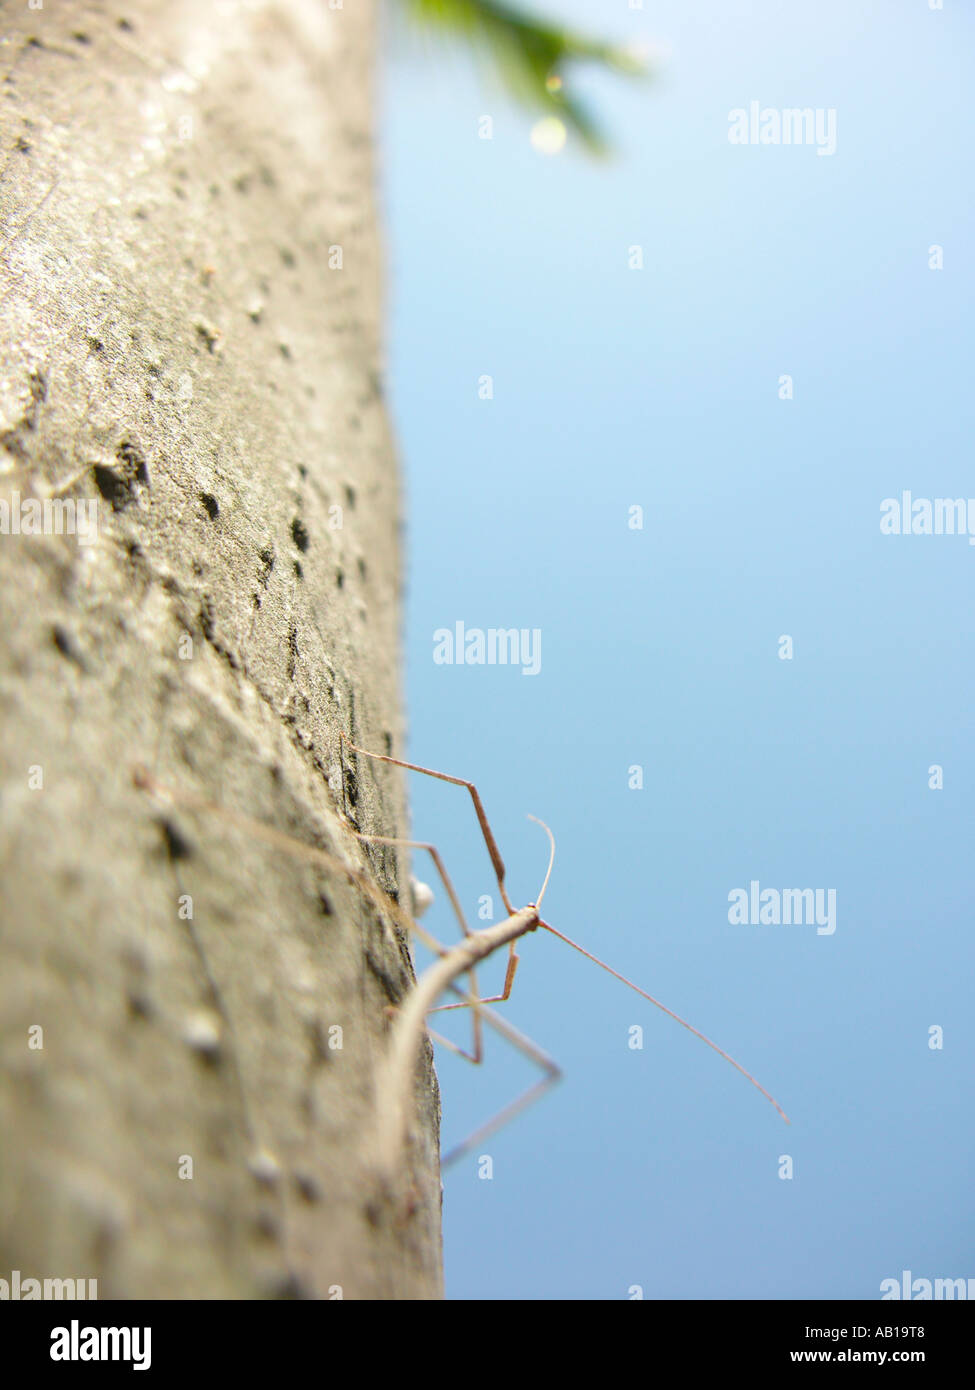 Stick insect climbing up palm tree trunk Stock Photo